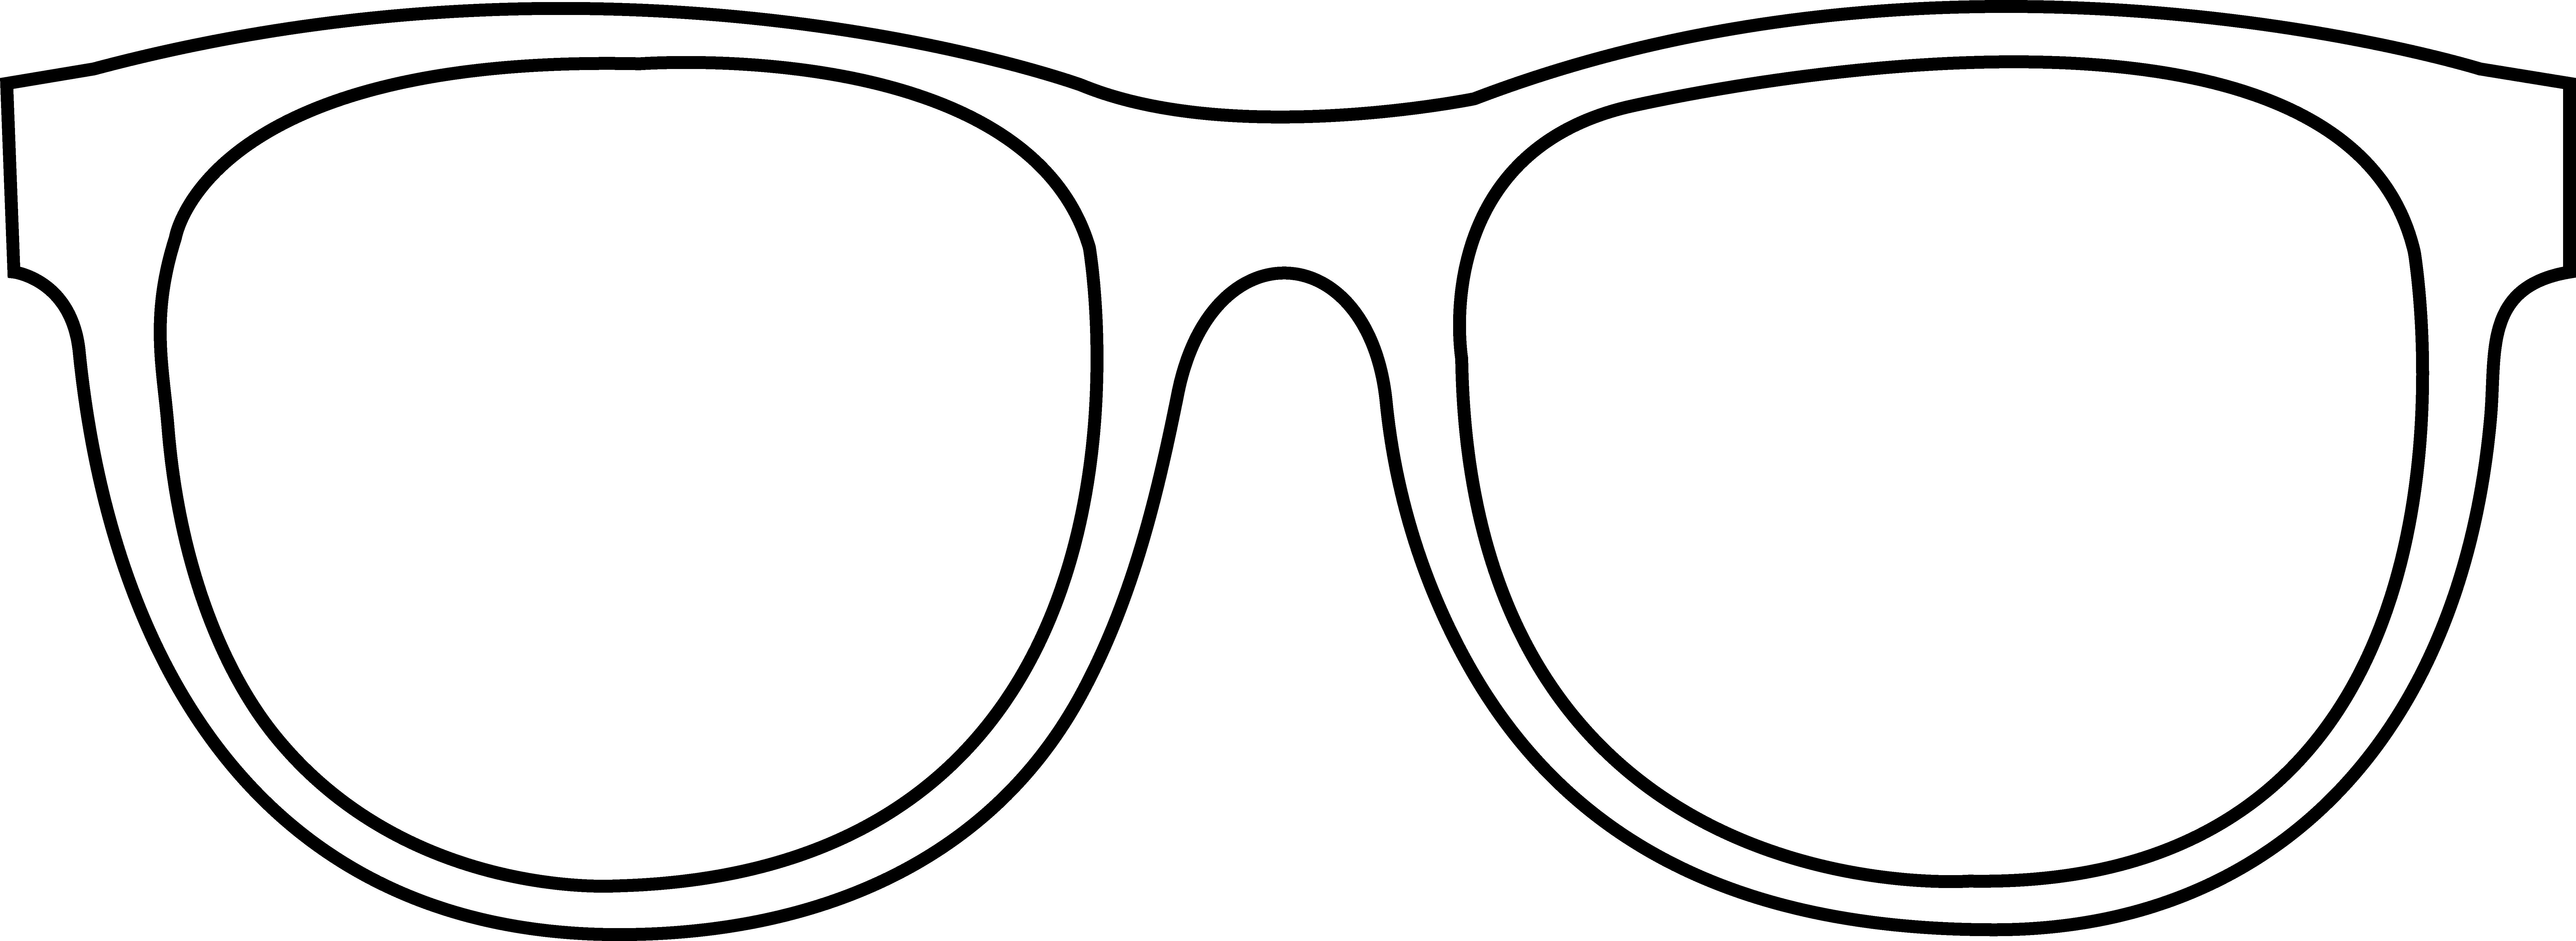 Sunglasses Clipart 2014 - The Best Glasses Cliparts 2014